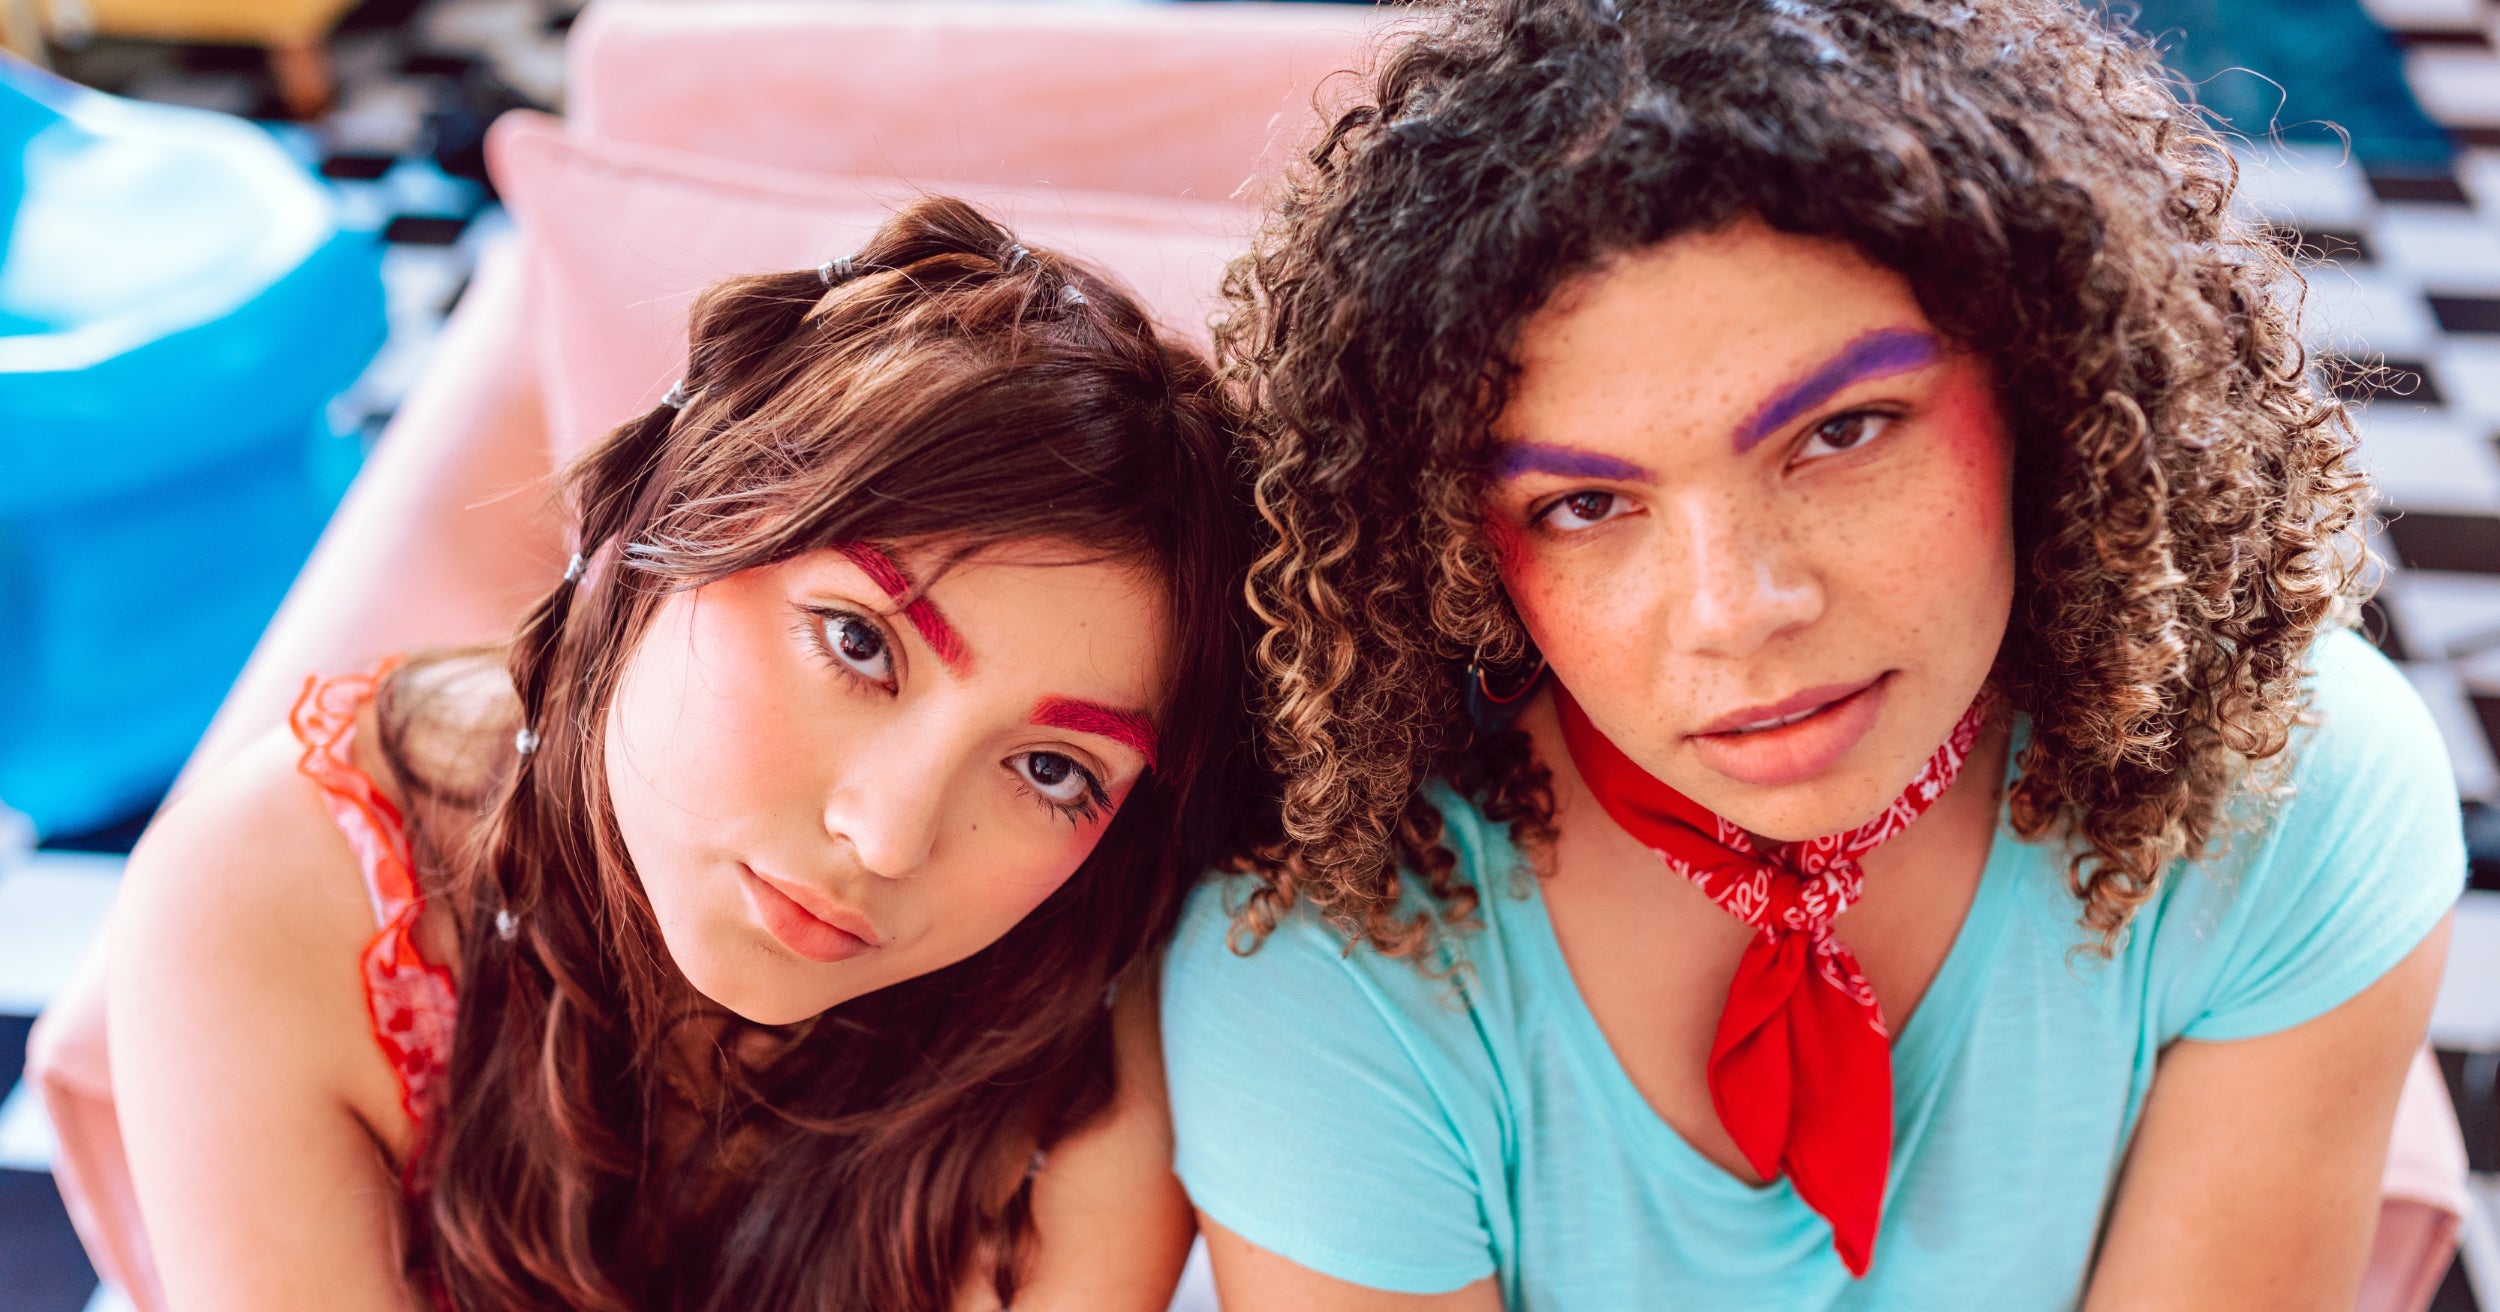 Two youth wearing colorful clothing stare into the camera